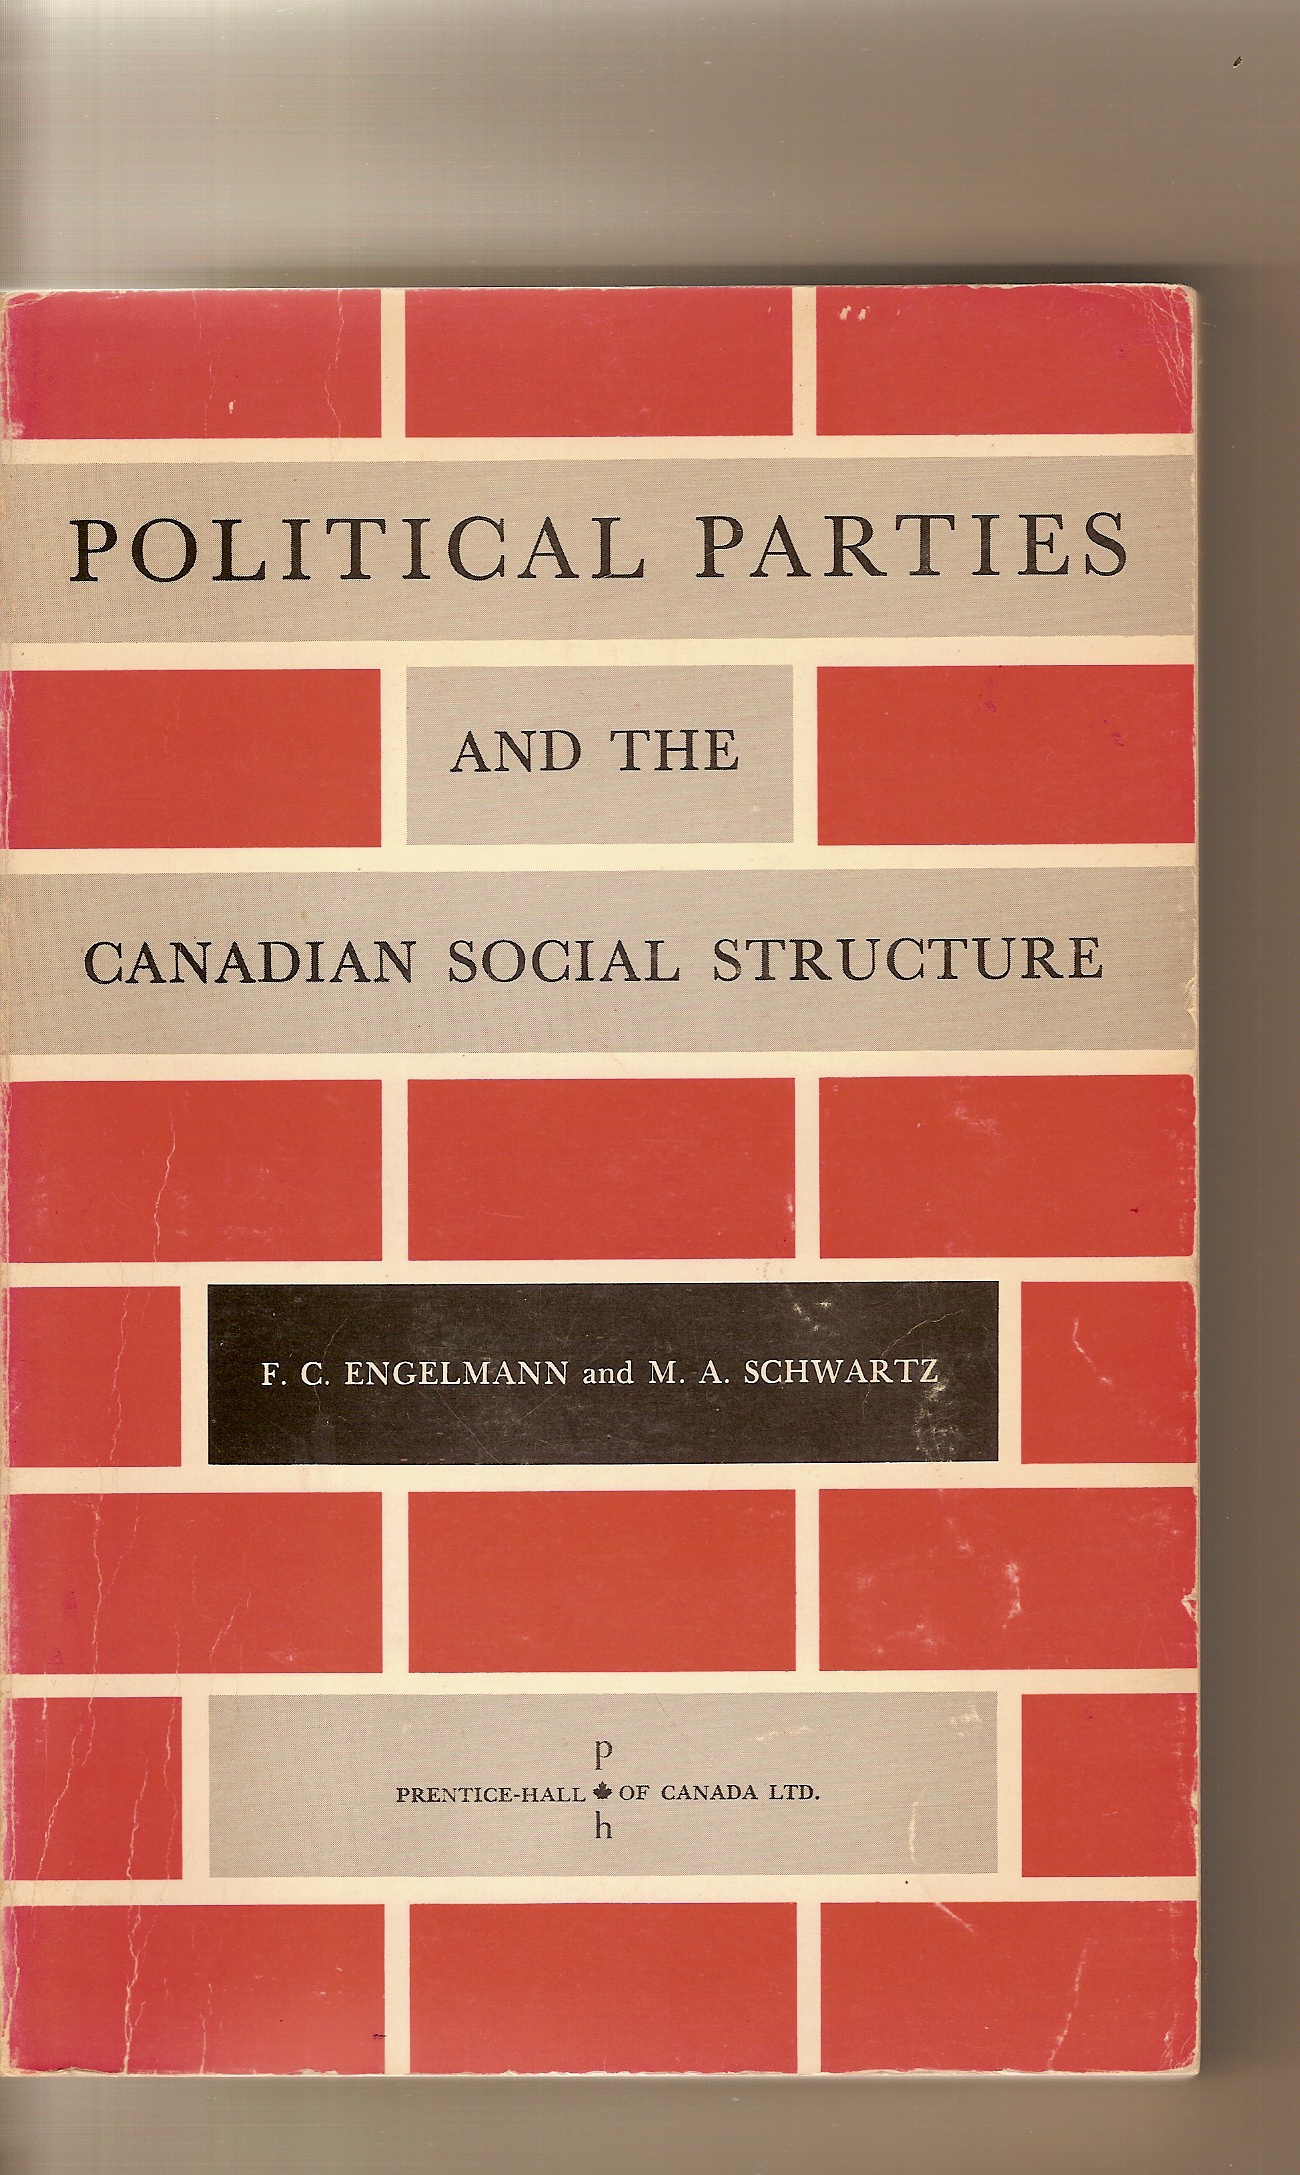 ENGELMANN F. C, M. A. SCHWARTZ - Political Parties and the Canadian Social Structure